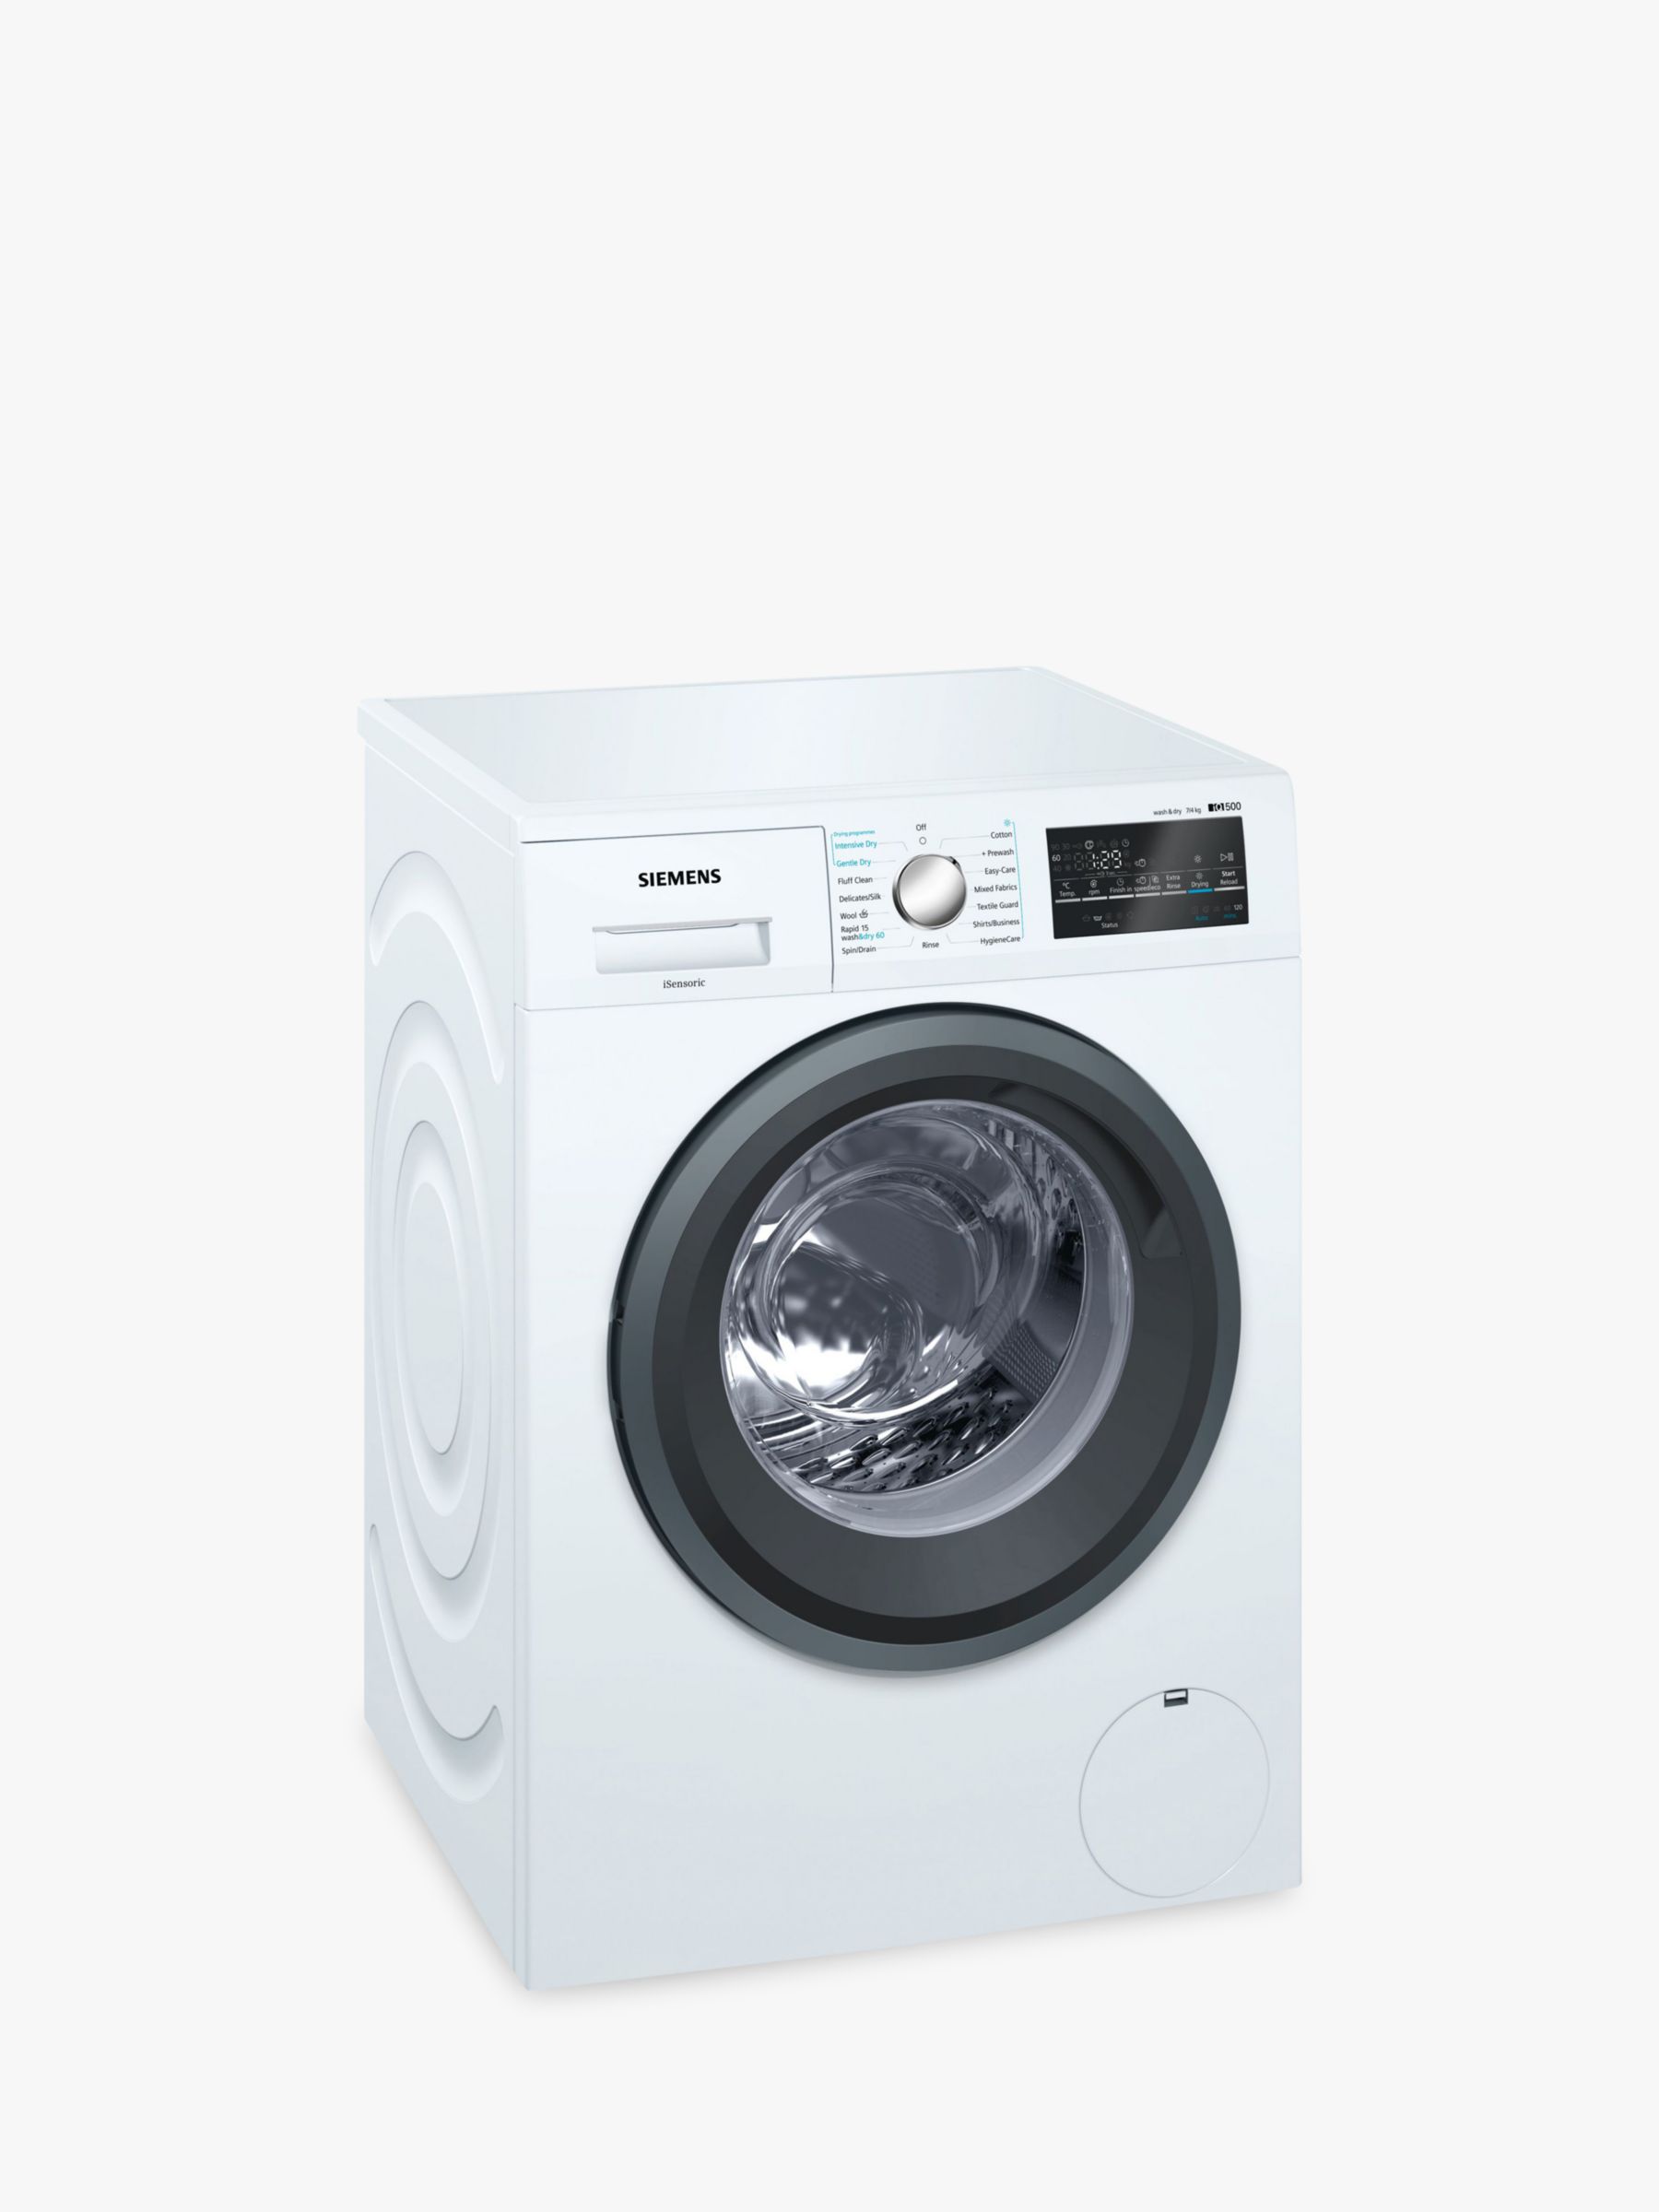 Siemens WD15G422GB Washer Dryer, 7kg/4kg Wash, A Energy Rating, 1500rpm Spin, White